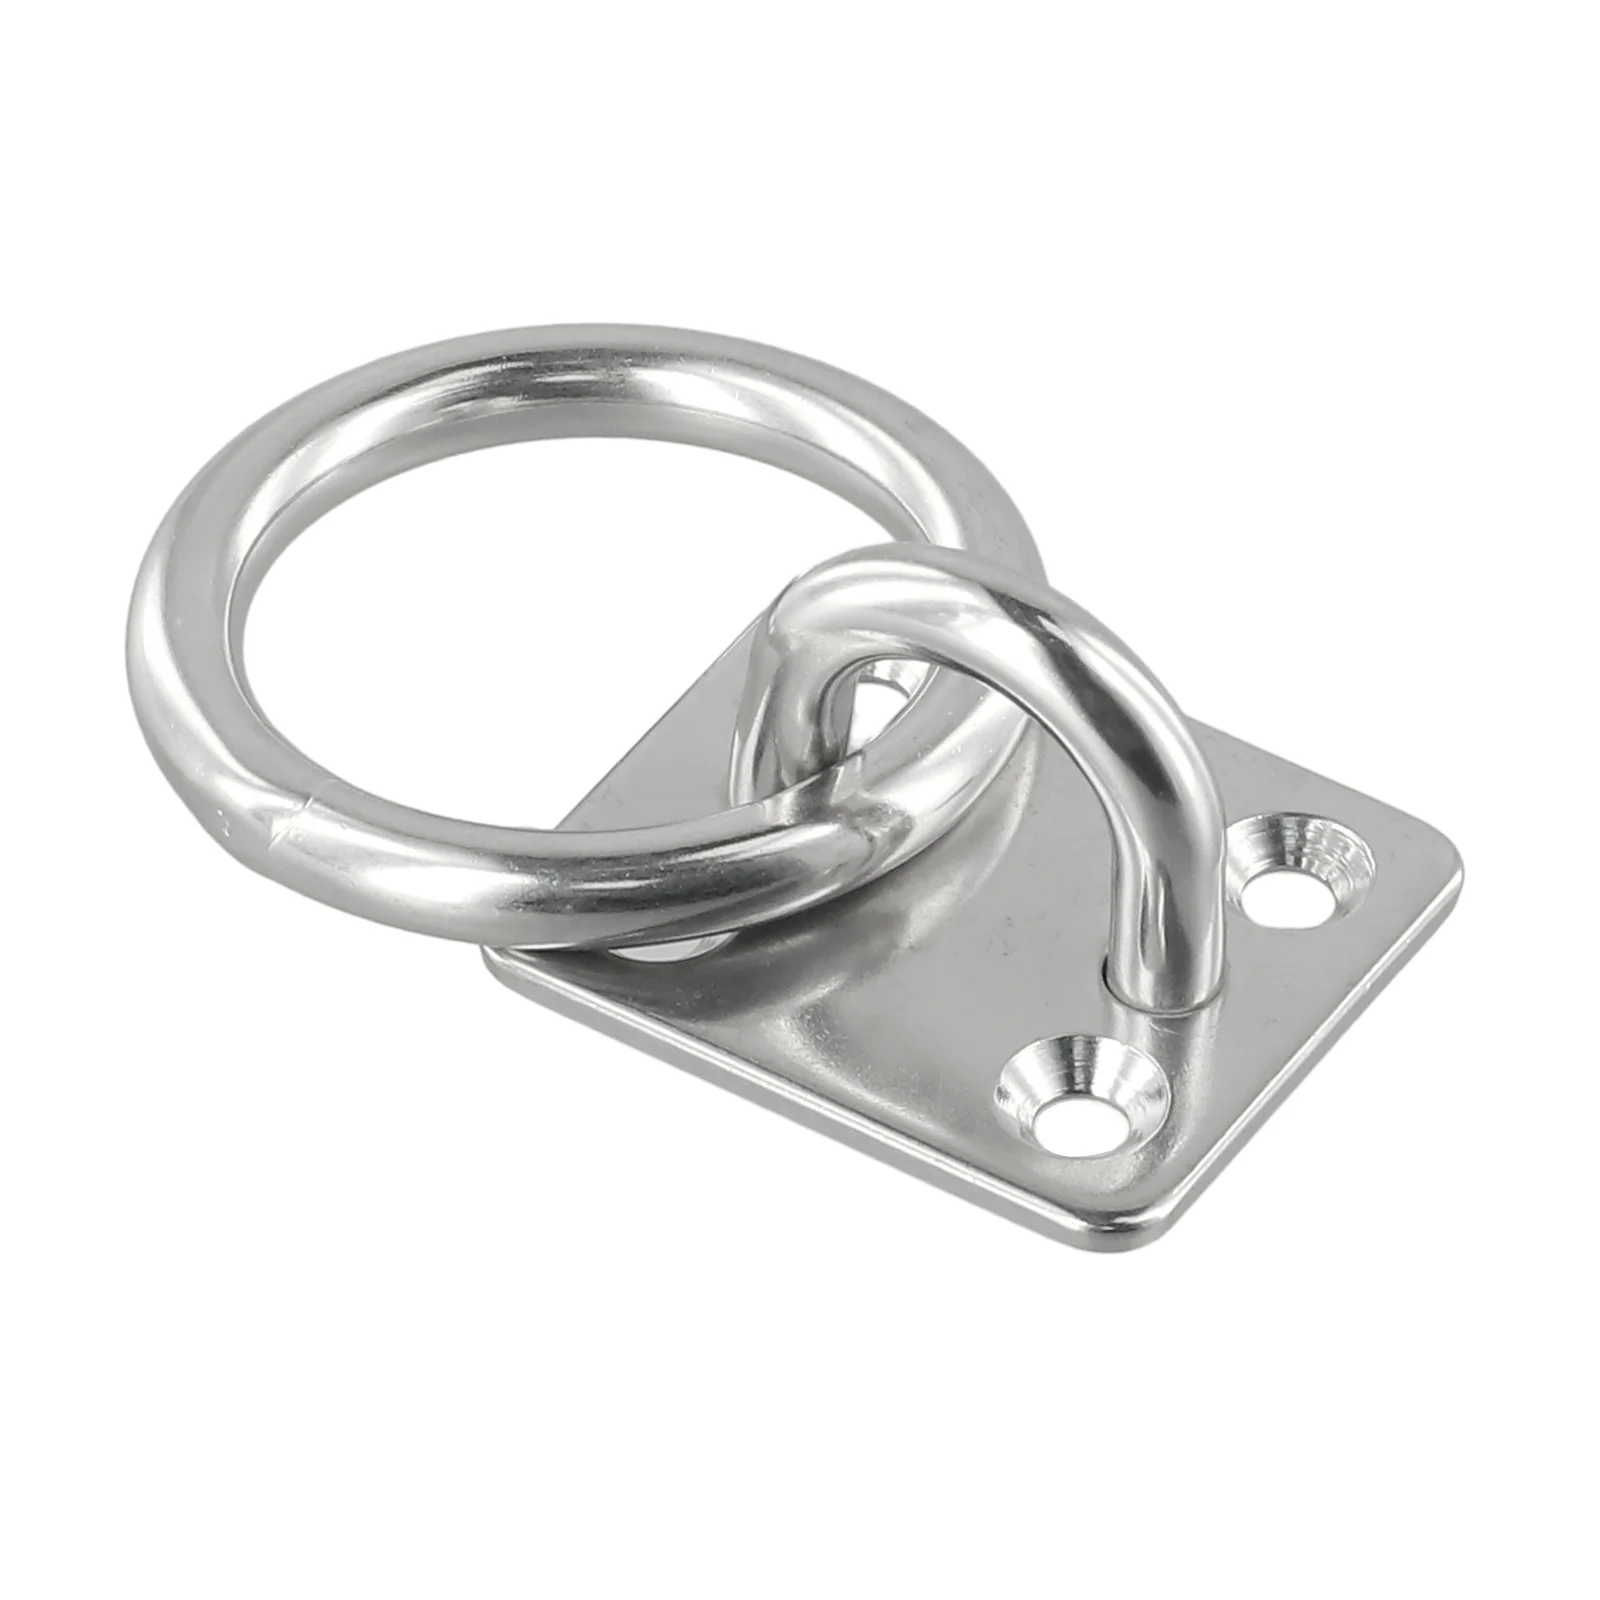 

Brand New High Quality Eye Plate Marine Square Stable Stainless Steel With Ring 1 Pcs Yacht 6mm Accessories Cabin